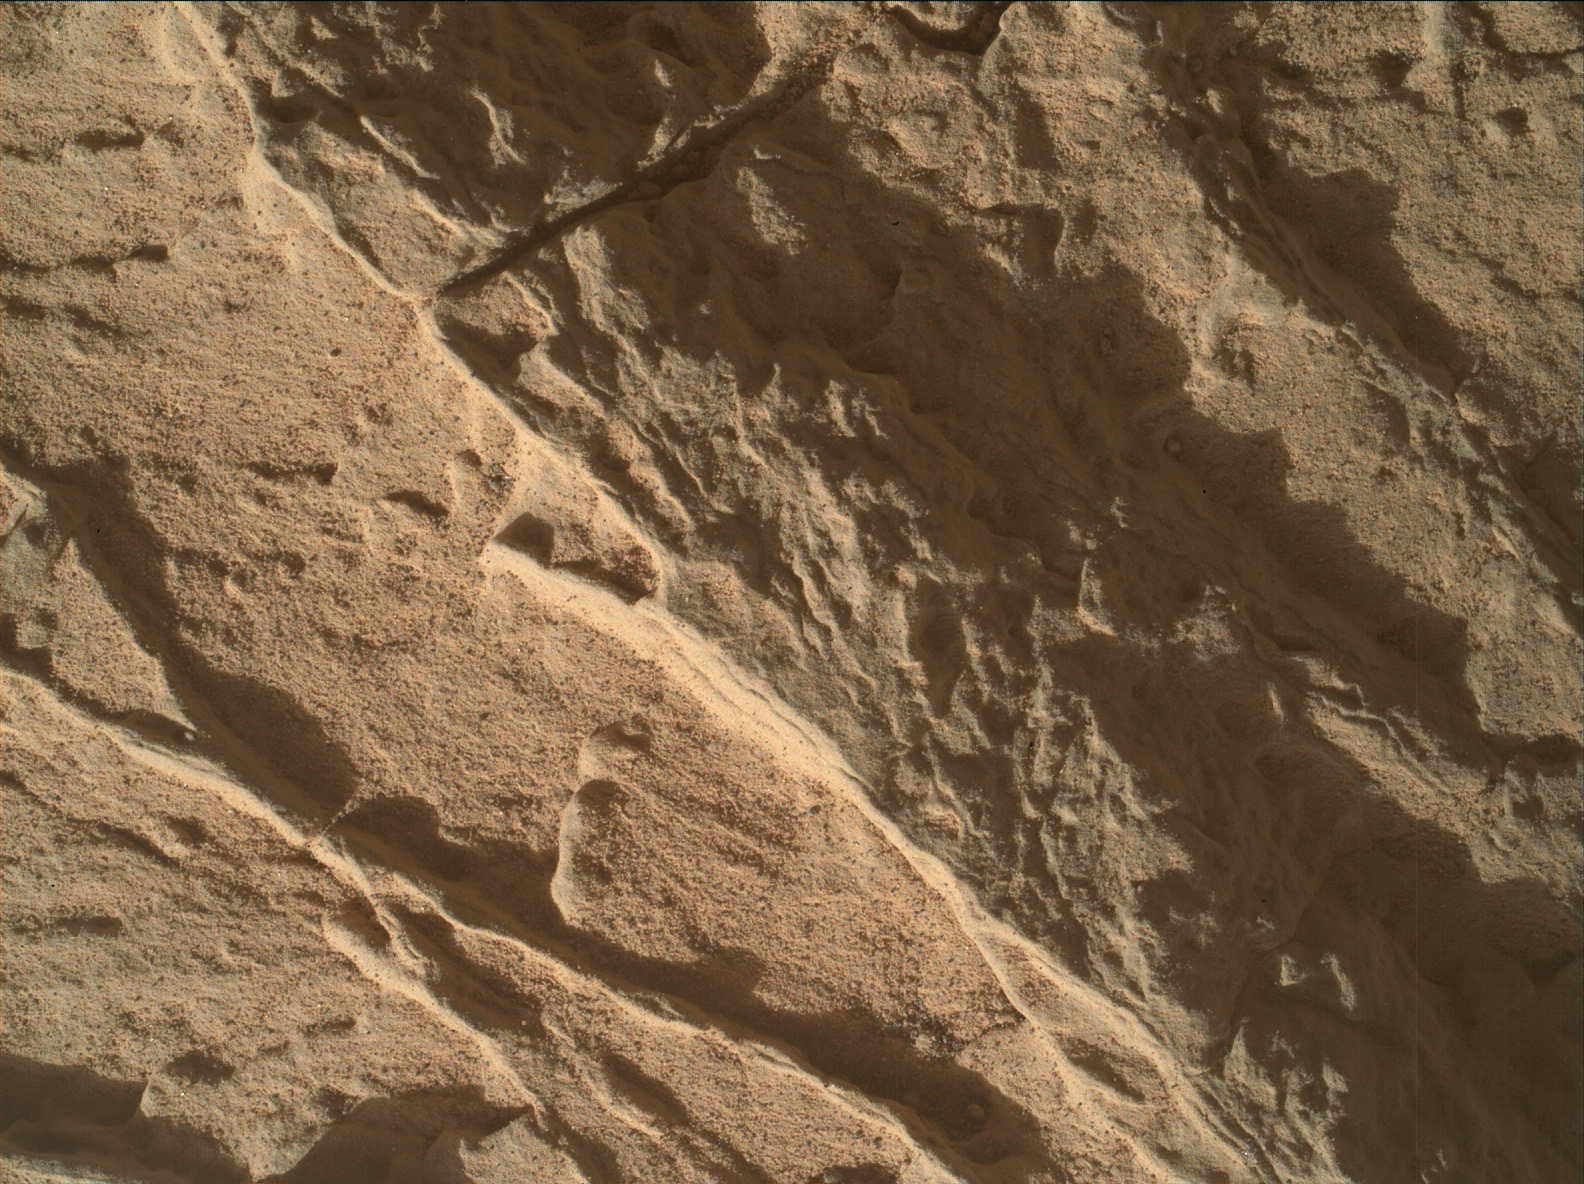 Nasa's Mars rover Curiosity acquired this image using its Mars Hand Lens Imager (MAHLI) on Sol 3908